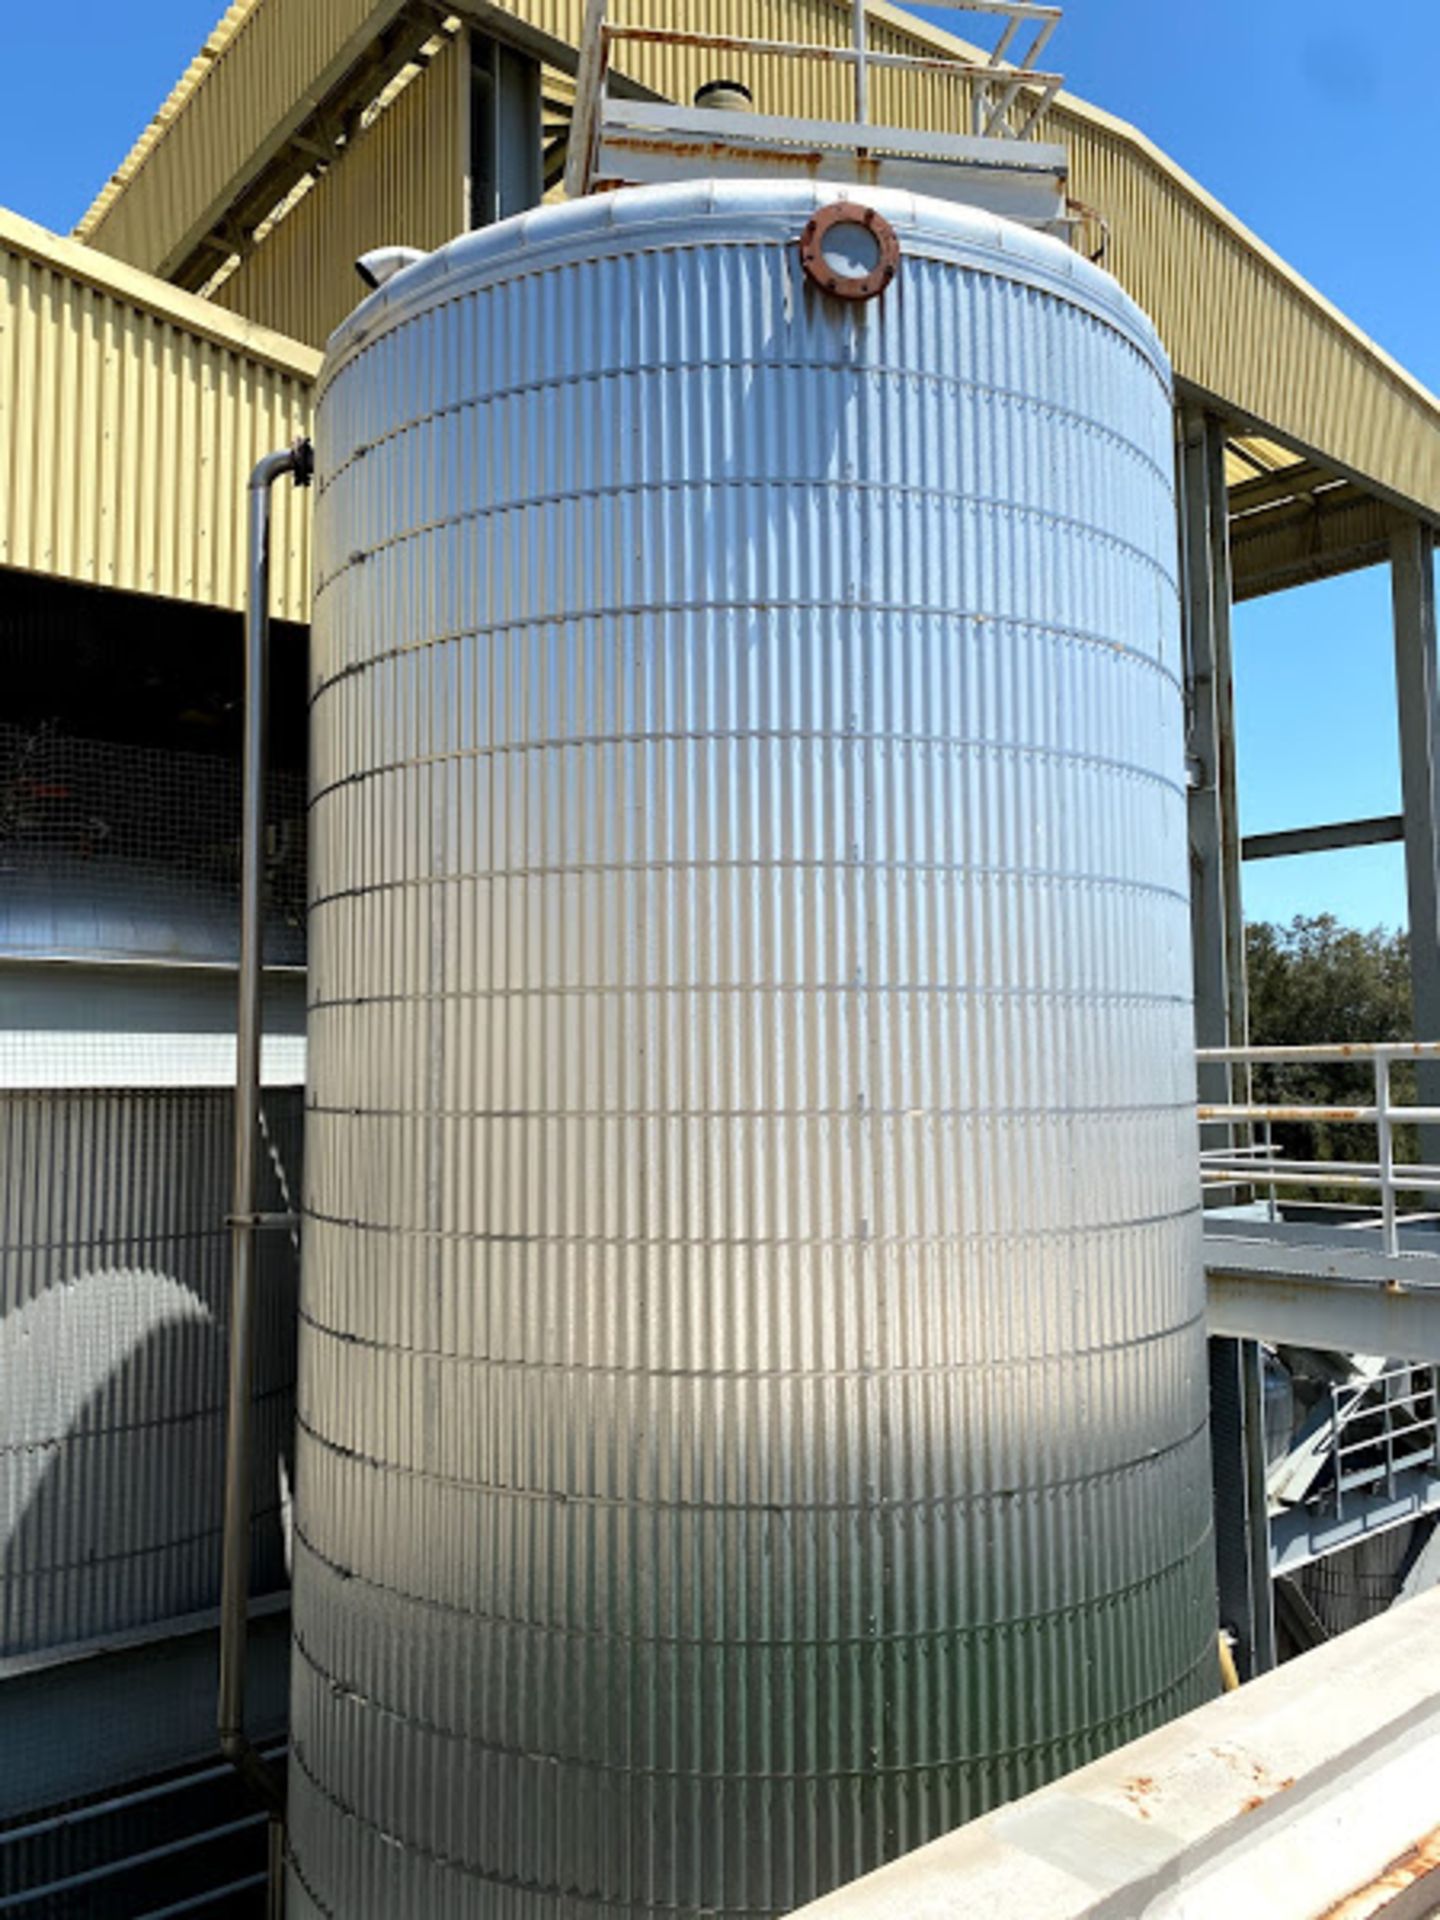 Precison Stainless Aprox. 18,000 Gal. S/S Dome Top Cone Bottom Tank, S/N 992295-1, PO Box - Image 2 of 8